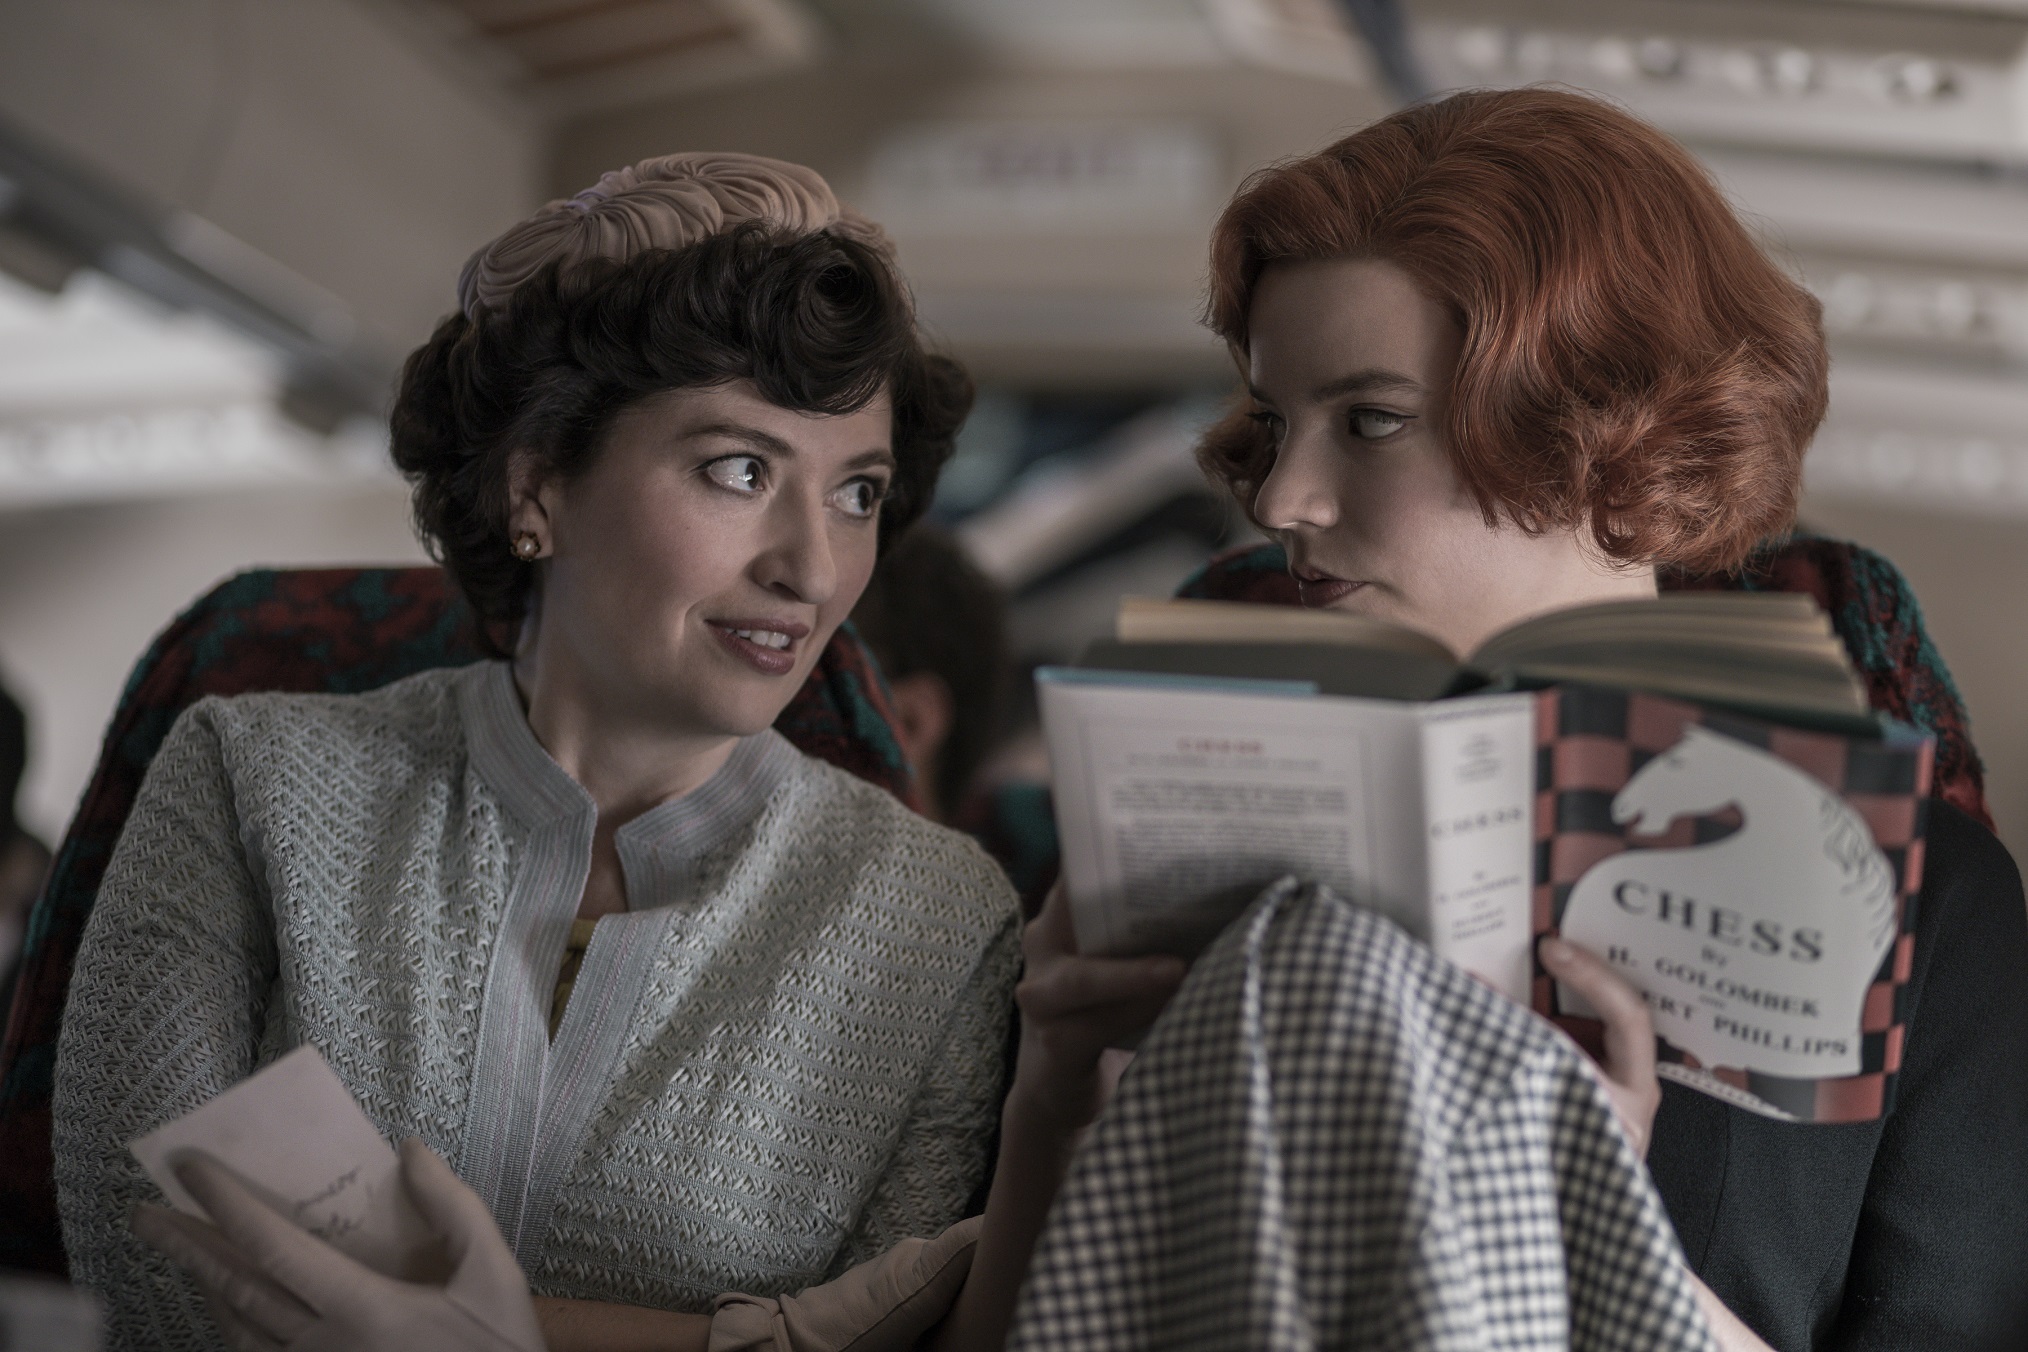 Mrs. Alma Wheatley (Marielle Heller) and Beth Harmon (Anya Taylor-Joy) sit next to each other in an airplane and engage in a conversation, while Beth attempts to read a book about chess.